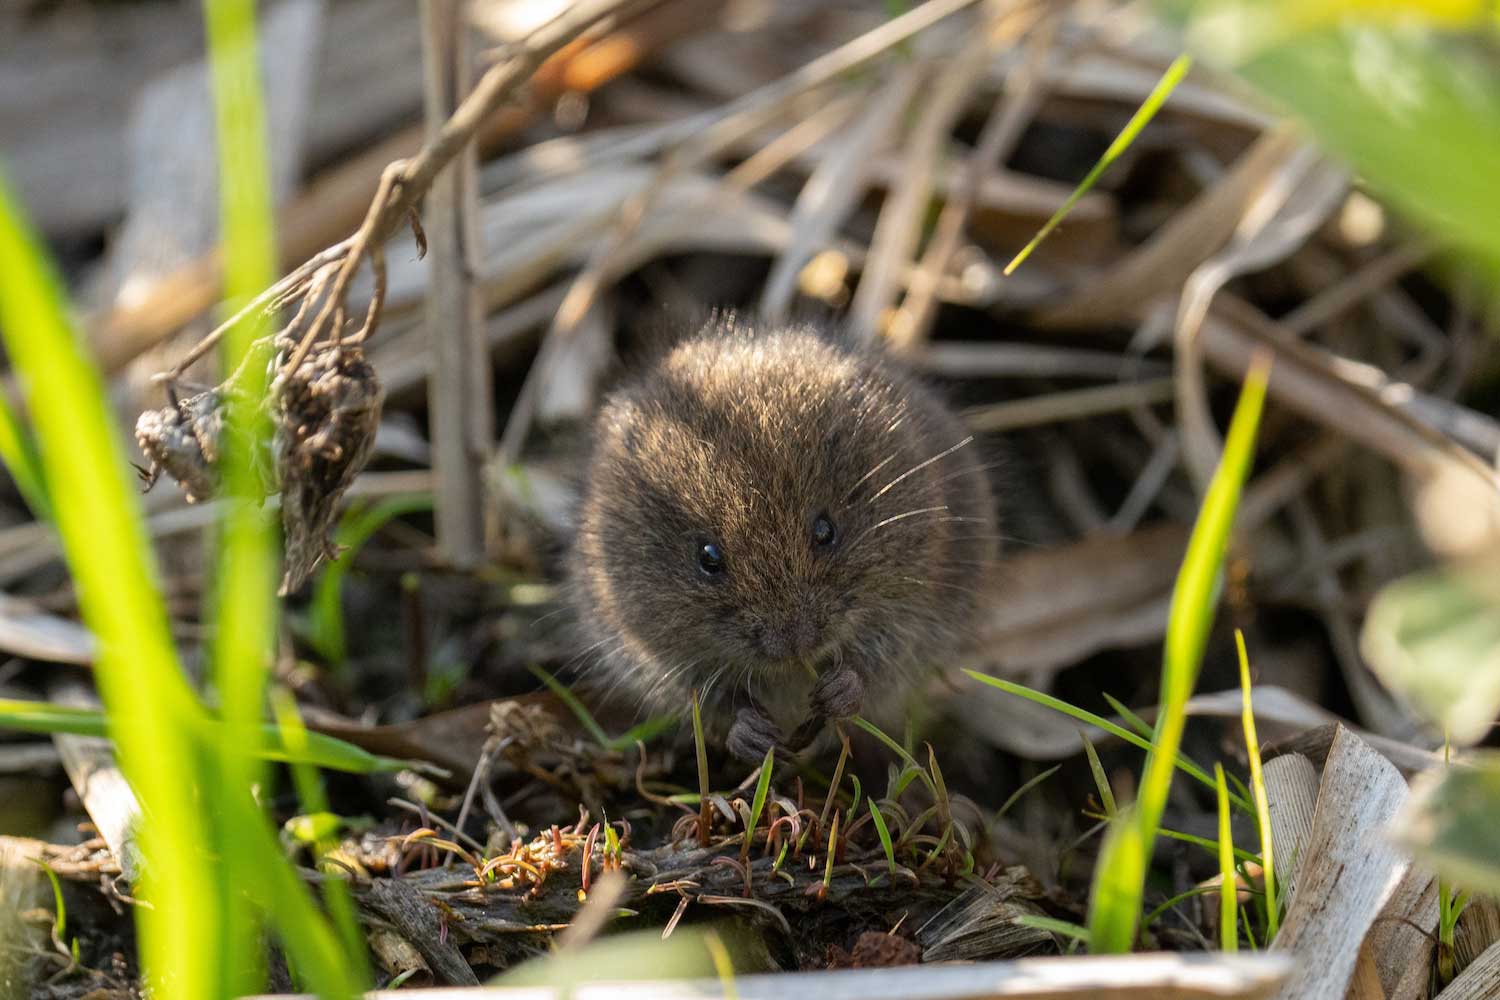 A vole on the ground surrounded by dried and green grasses.